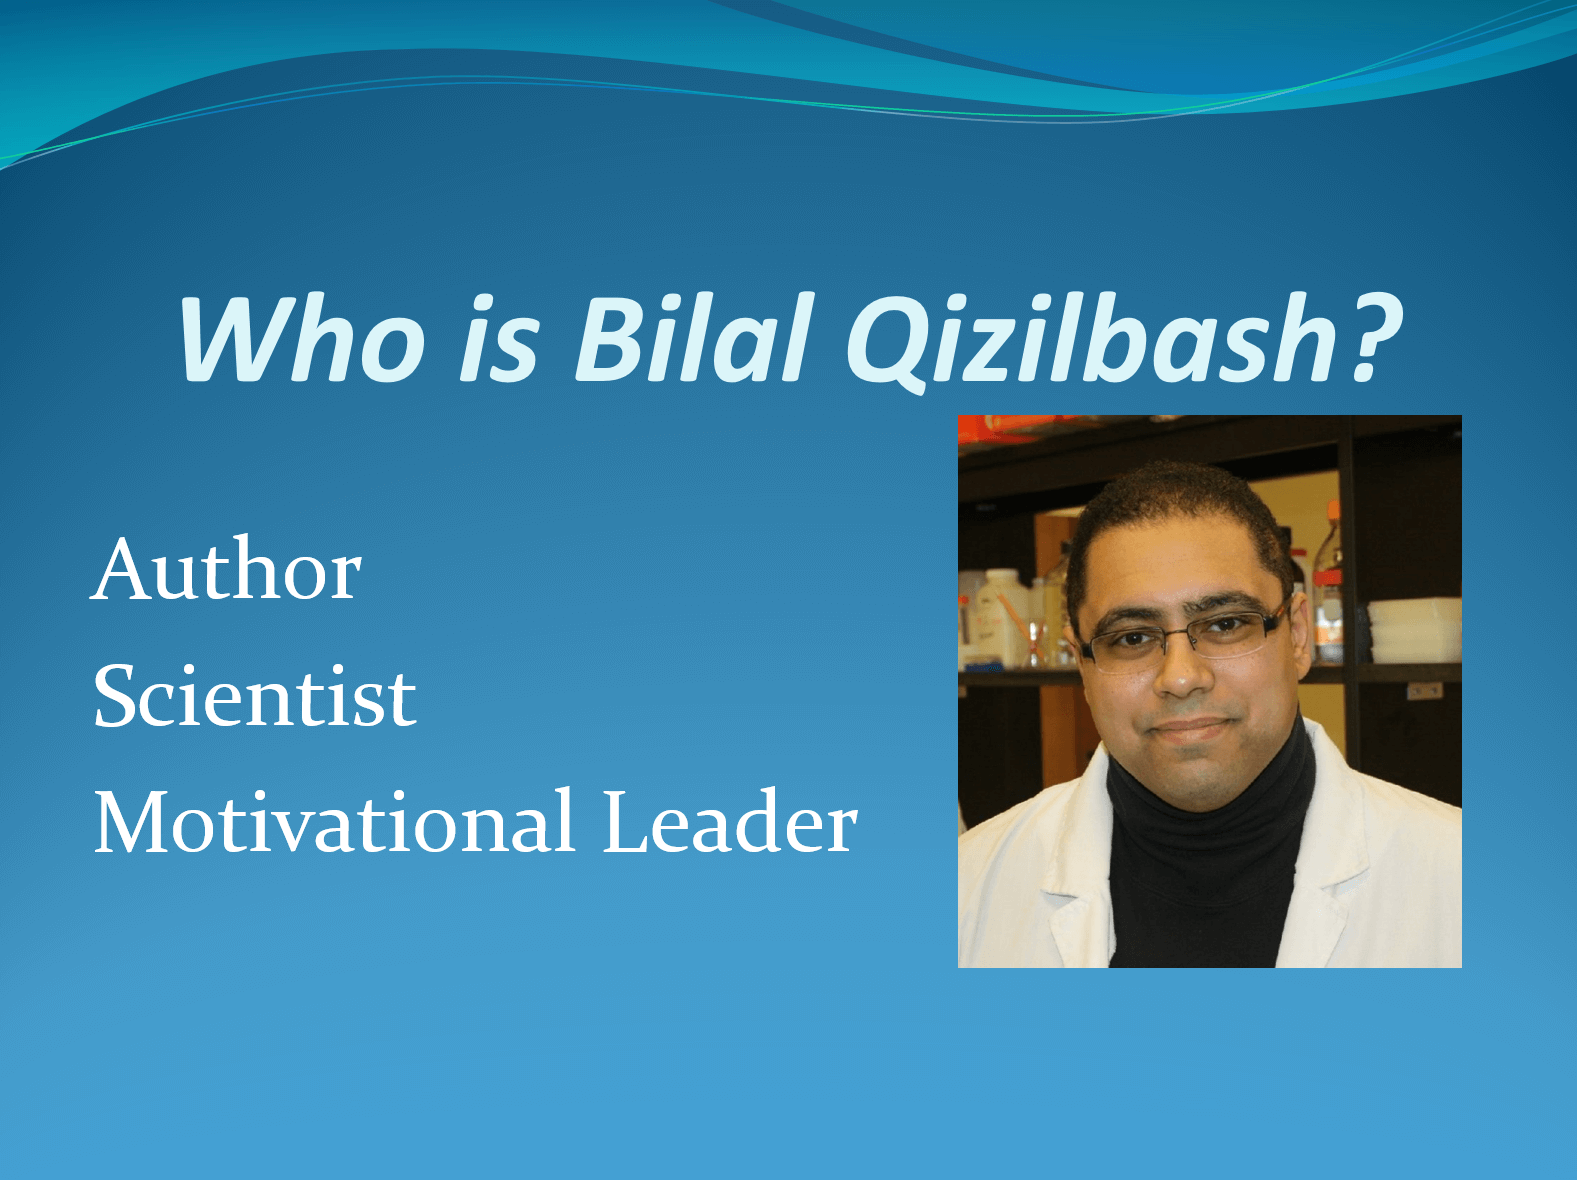 PowerPoint slide highlights diverse Bilal Qizilbash's roles with text written author, scientist, and motivational leader.